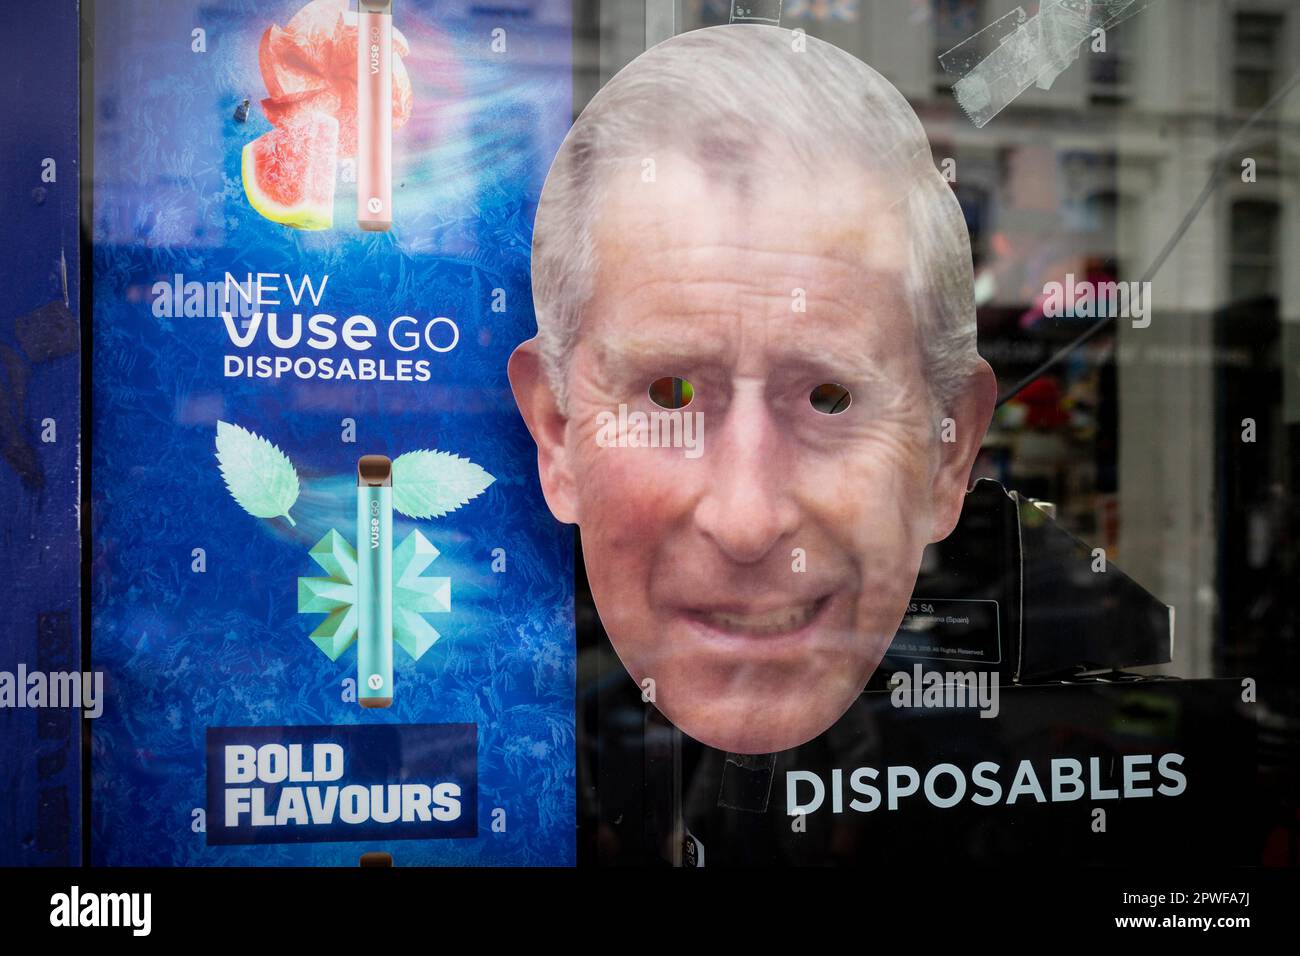 London, UK.  30 April 2023.  Royal memorabilia, including a King Charles facemask next to an advertisement for a vaping product, seen in the window of a souvenir shop in Paddington ahead of the coronation of King Charles III on 6 May.  Credit: Stephen Chung / Alamy Live News Stock Photo